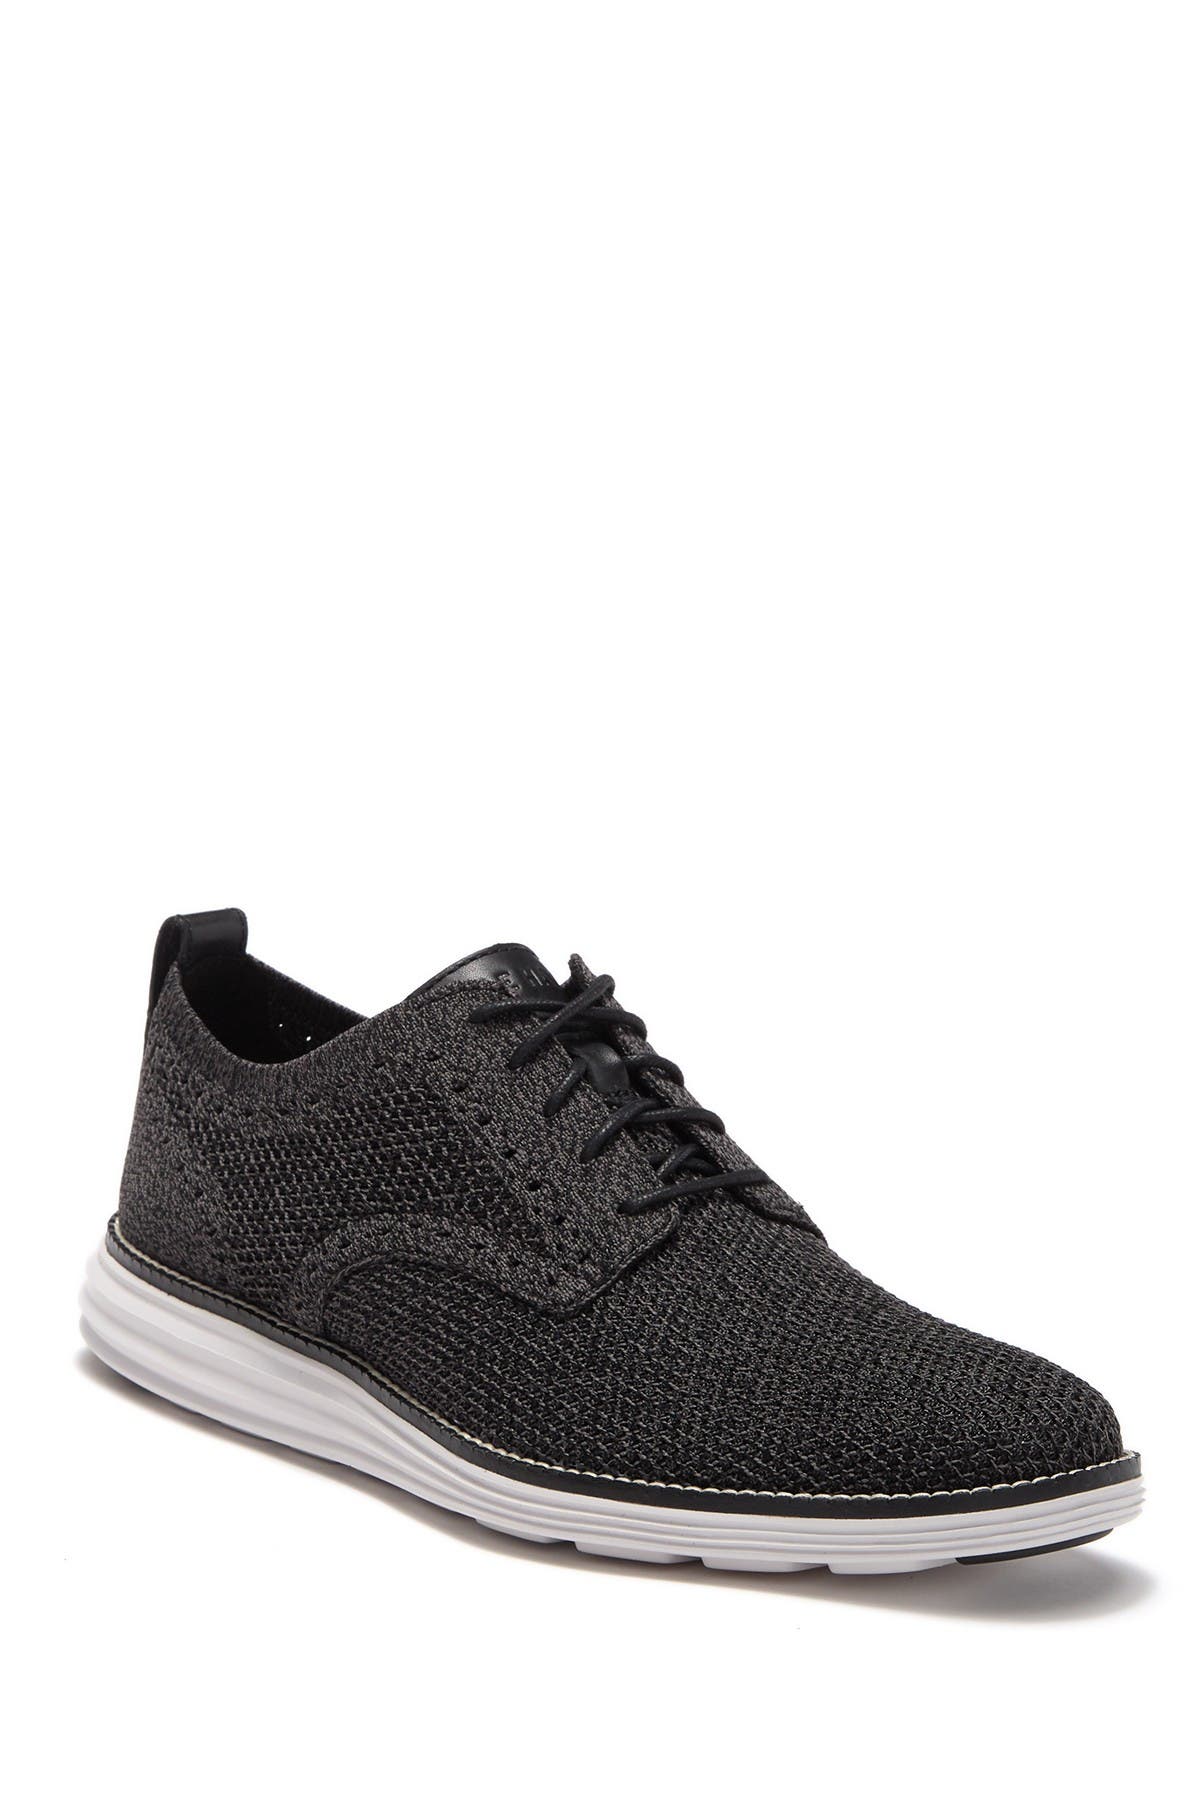 cole haan grand os price